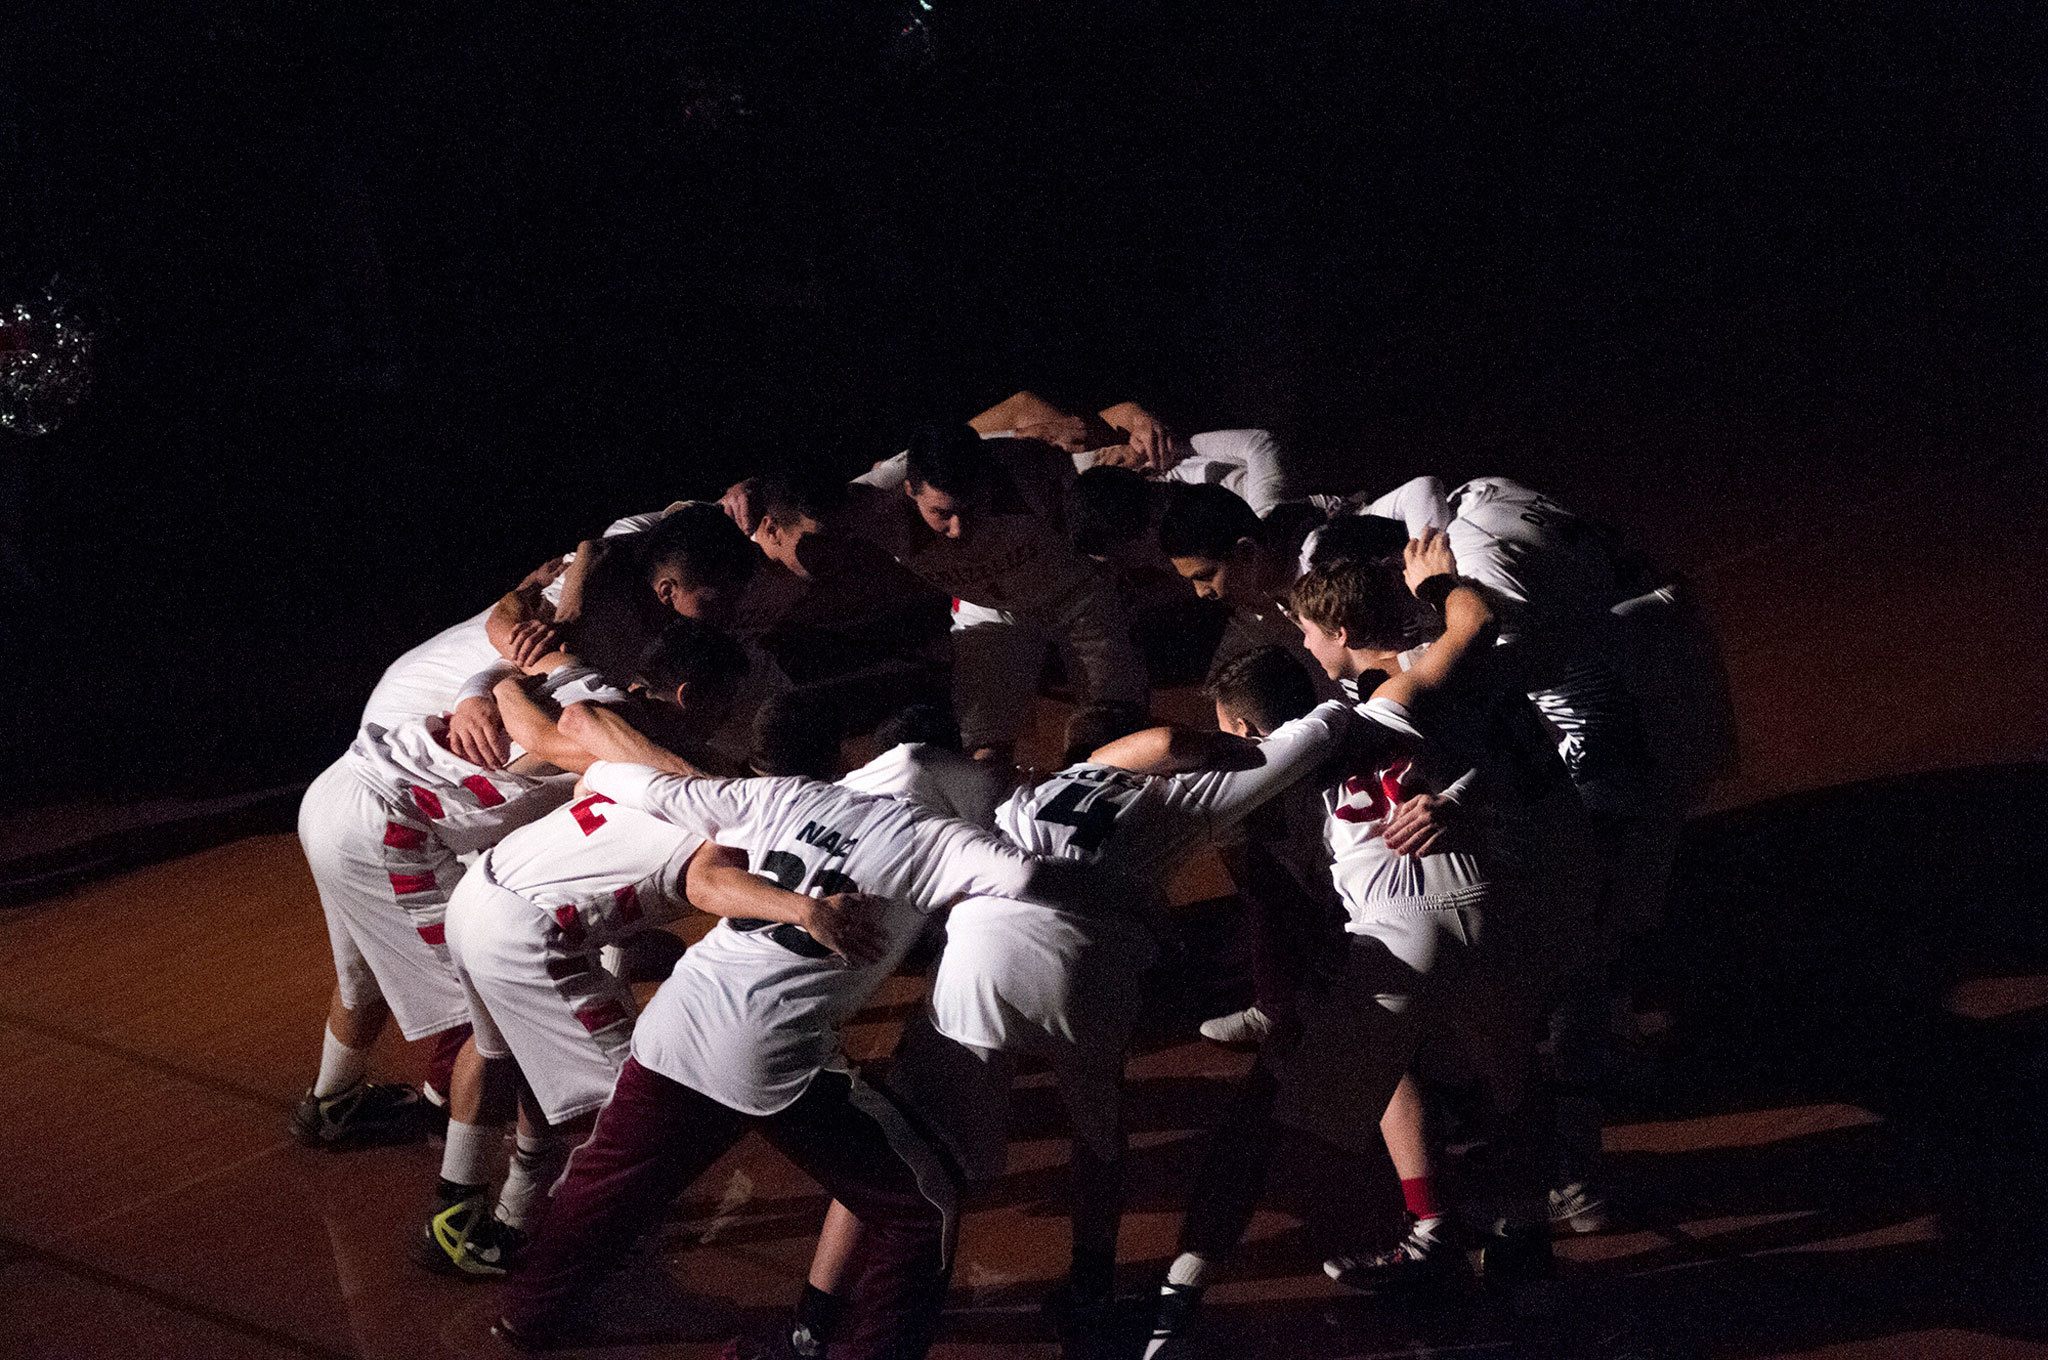 (Brendan Carl | The Daily World) Hoquiam’s boys varsity basketball team huddles up in the dark before its takes the court against Tumwater at Hoquiam Square Garden in December.